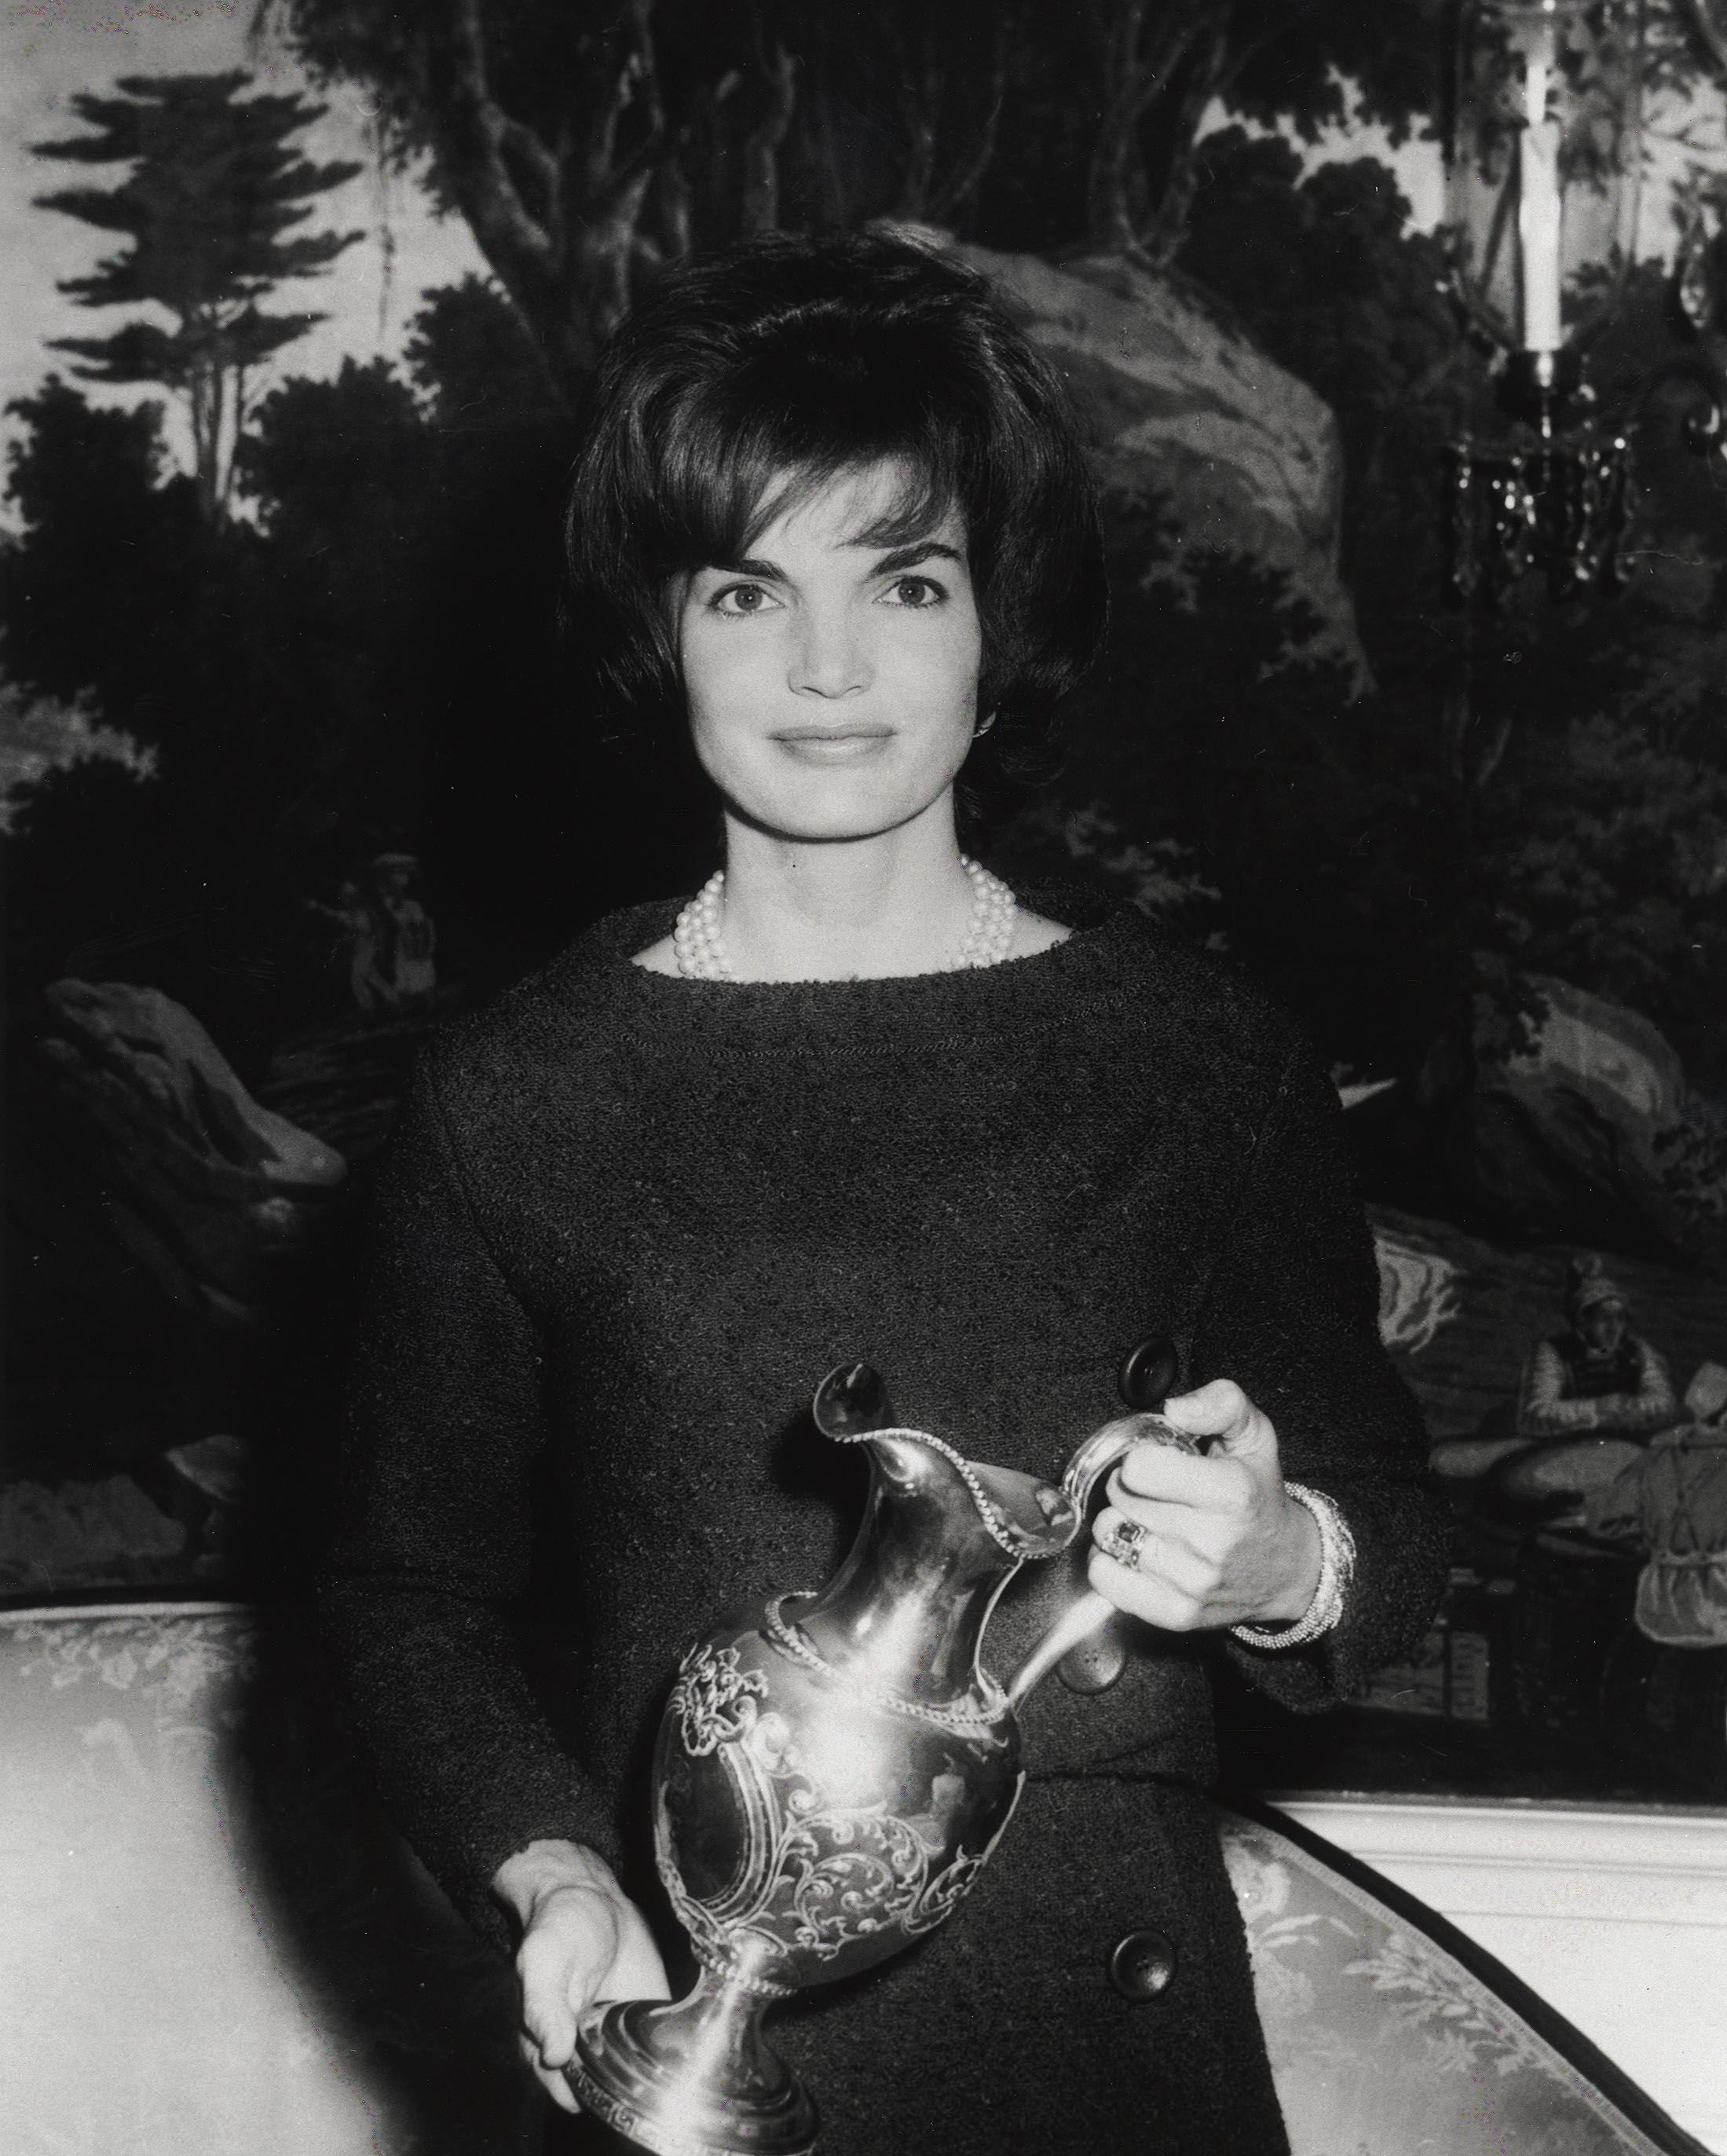 First Lady Jacqueline Kennedy poses for a photograph while holding a gift on December 12, 1961, in Washington D.C. | Source: Getty Images